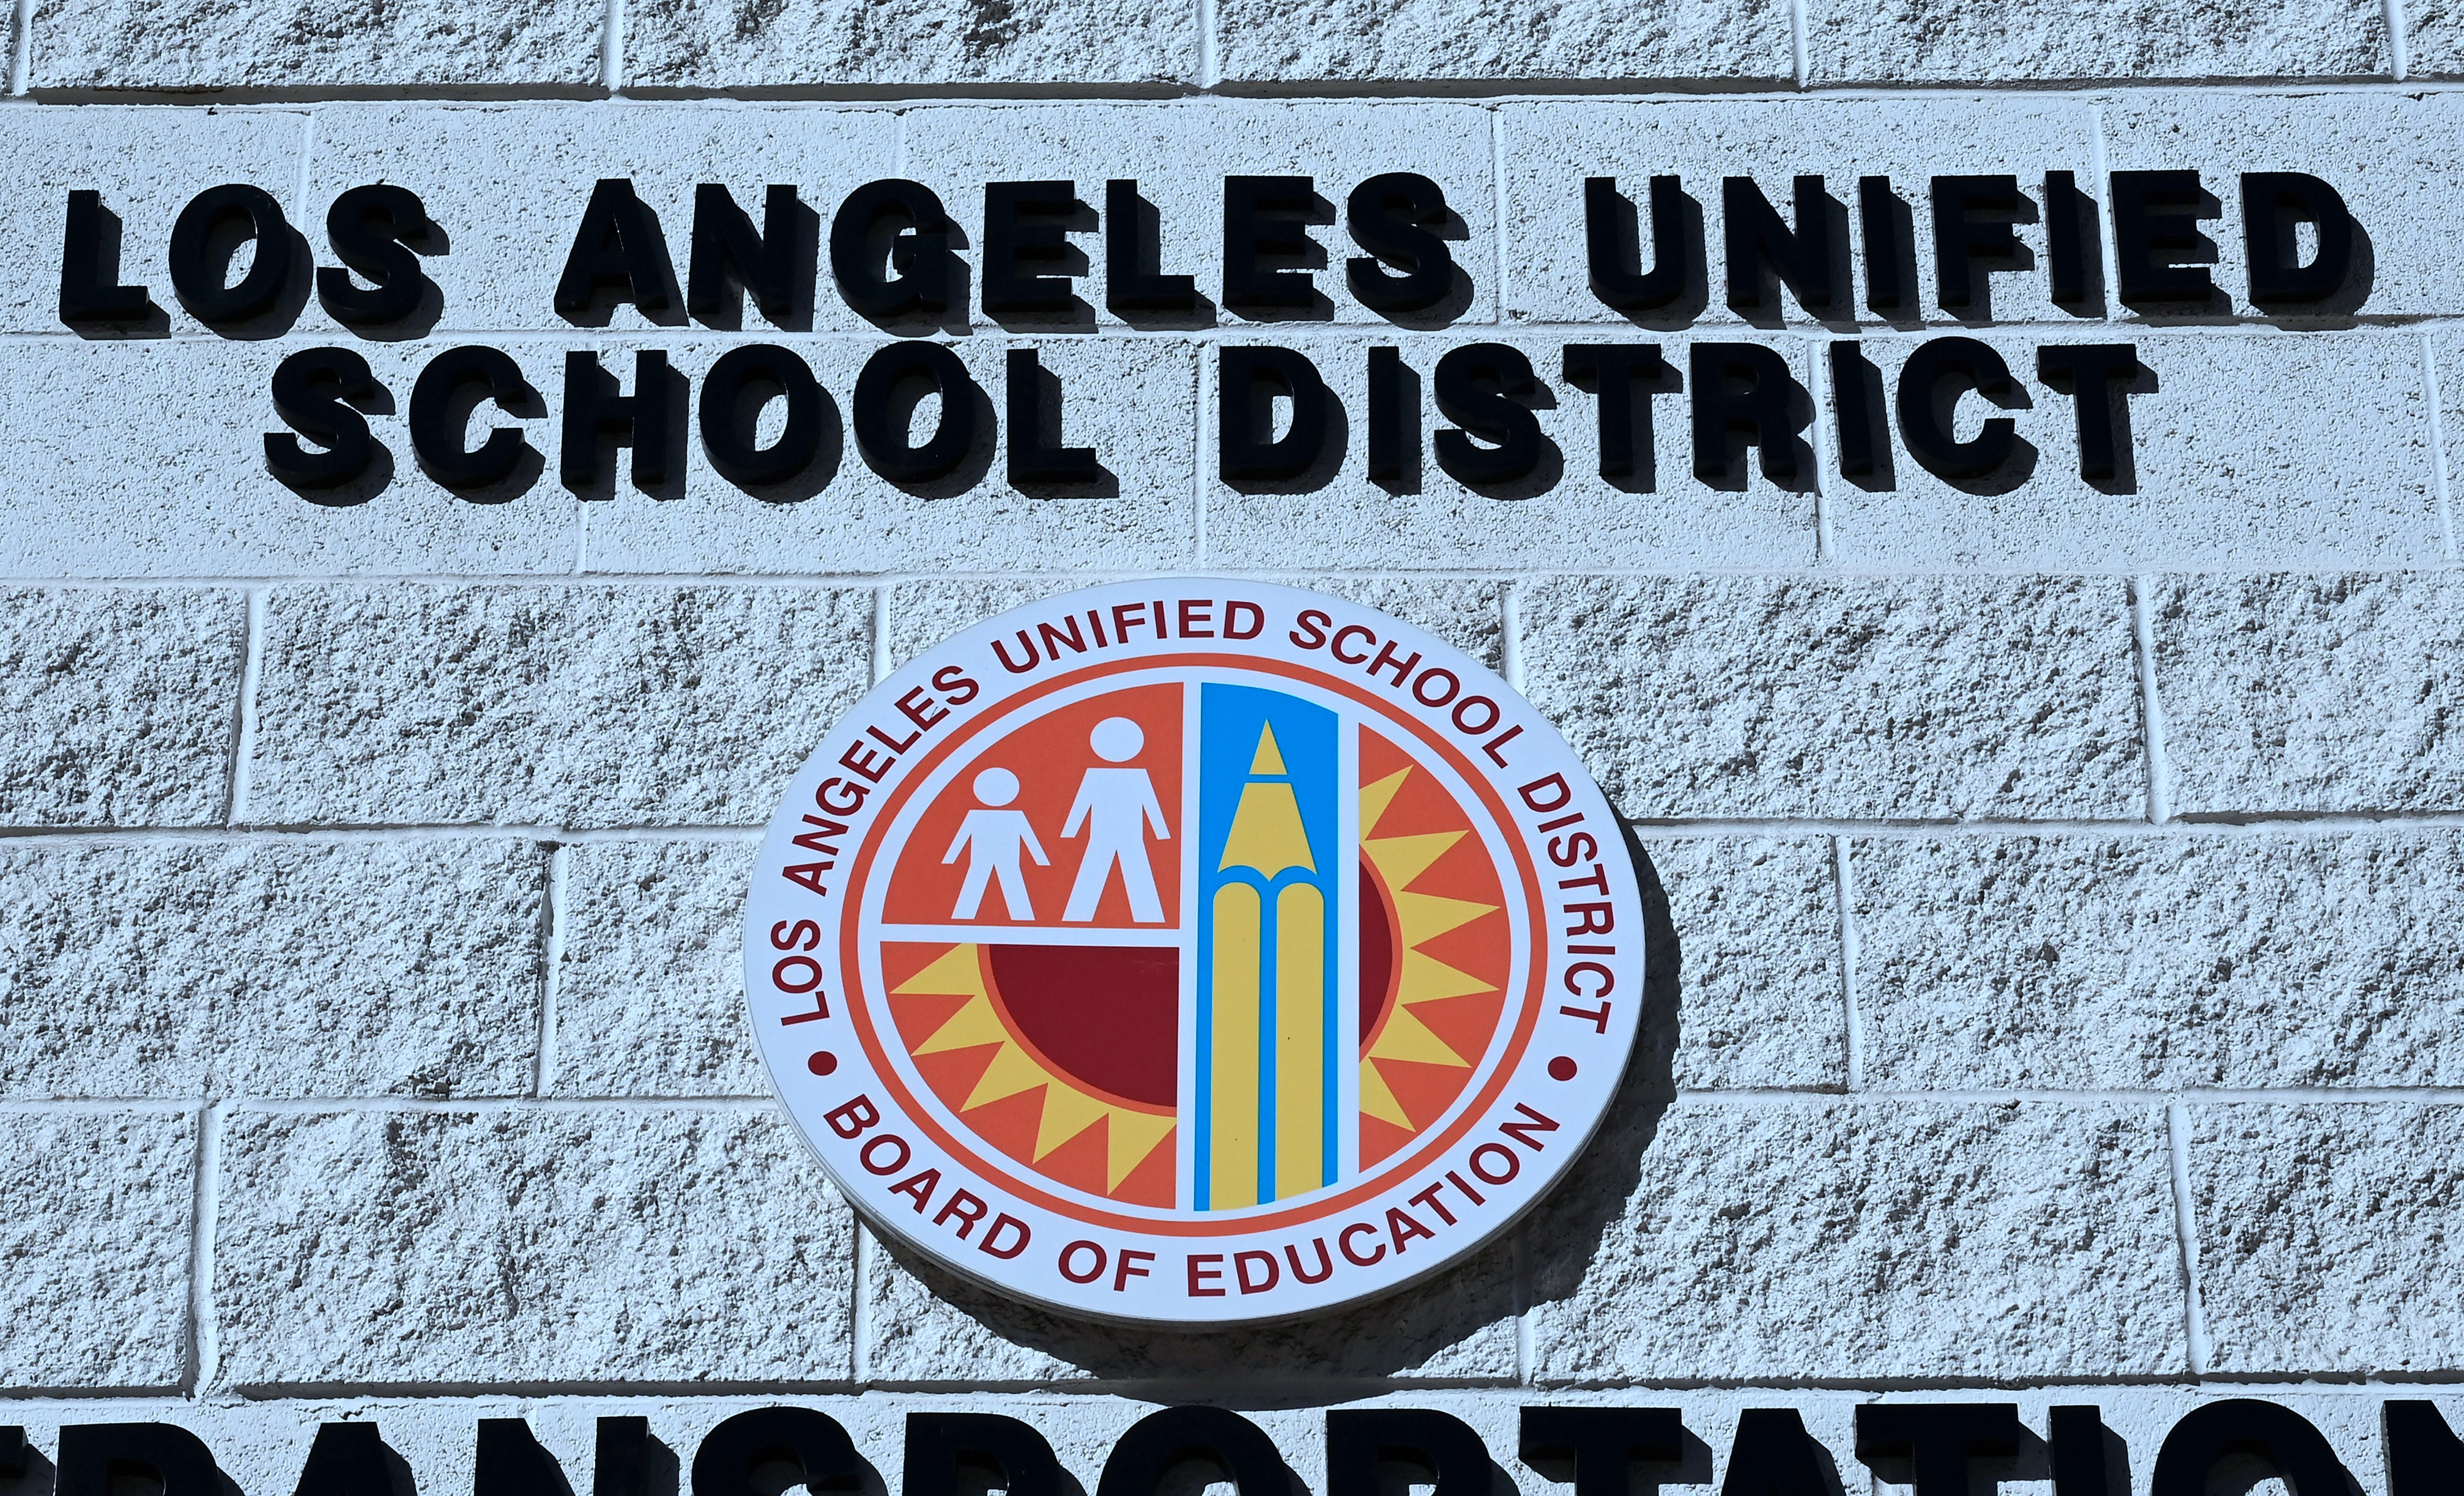 Board members for the Los Angeles Unified School District, pictured, voted 5-2 in favor of banning cell phones and social media during school hours